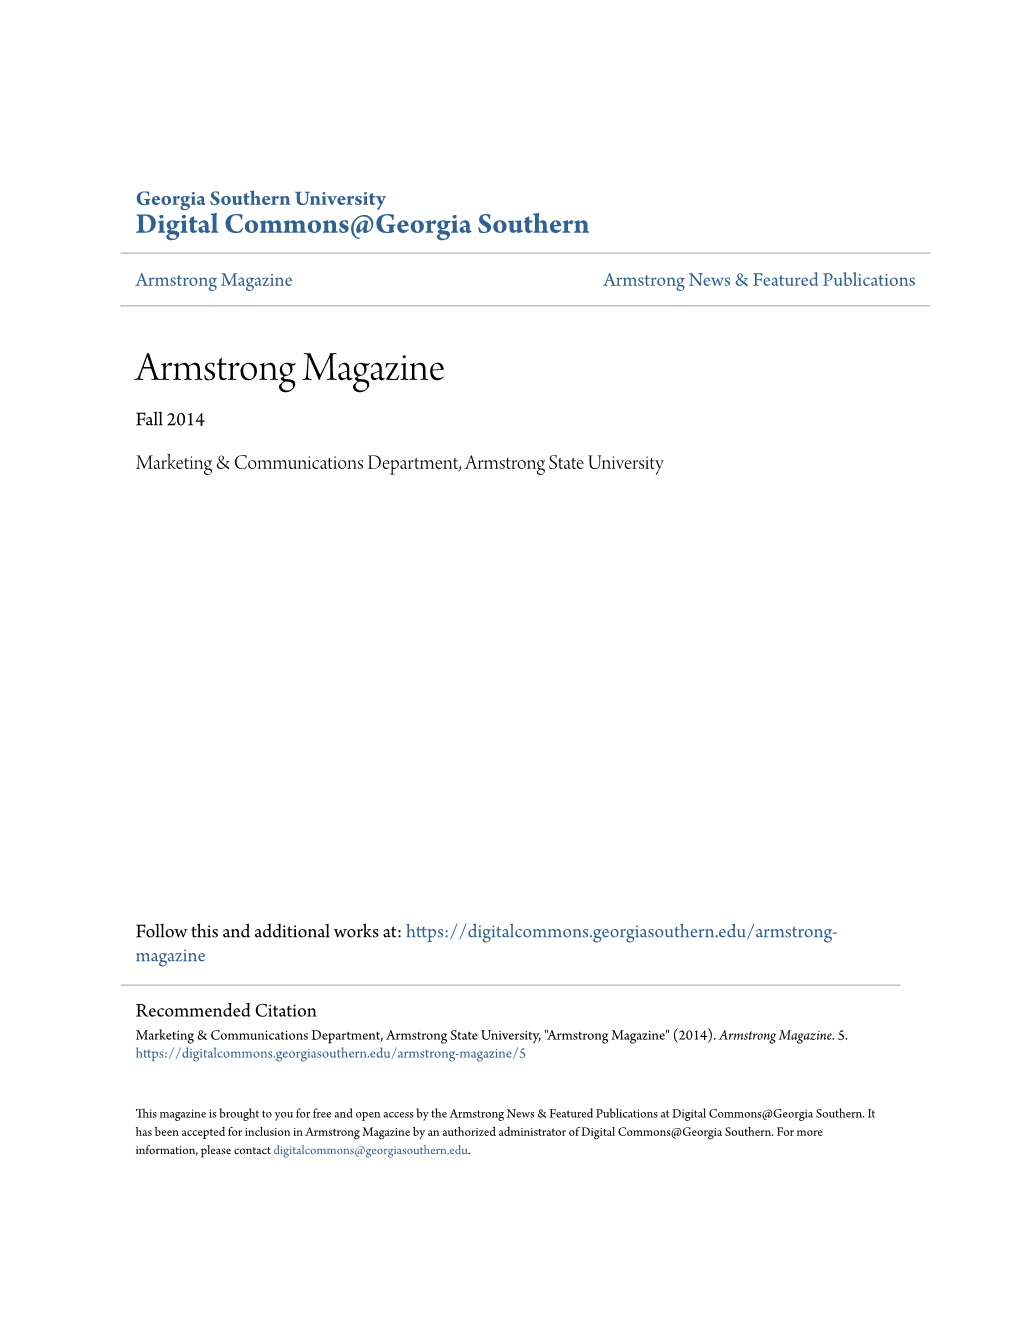 Armstrong Magazine Armstrong News & Featured Publications